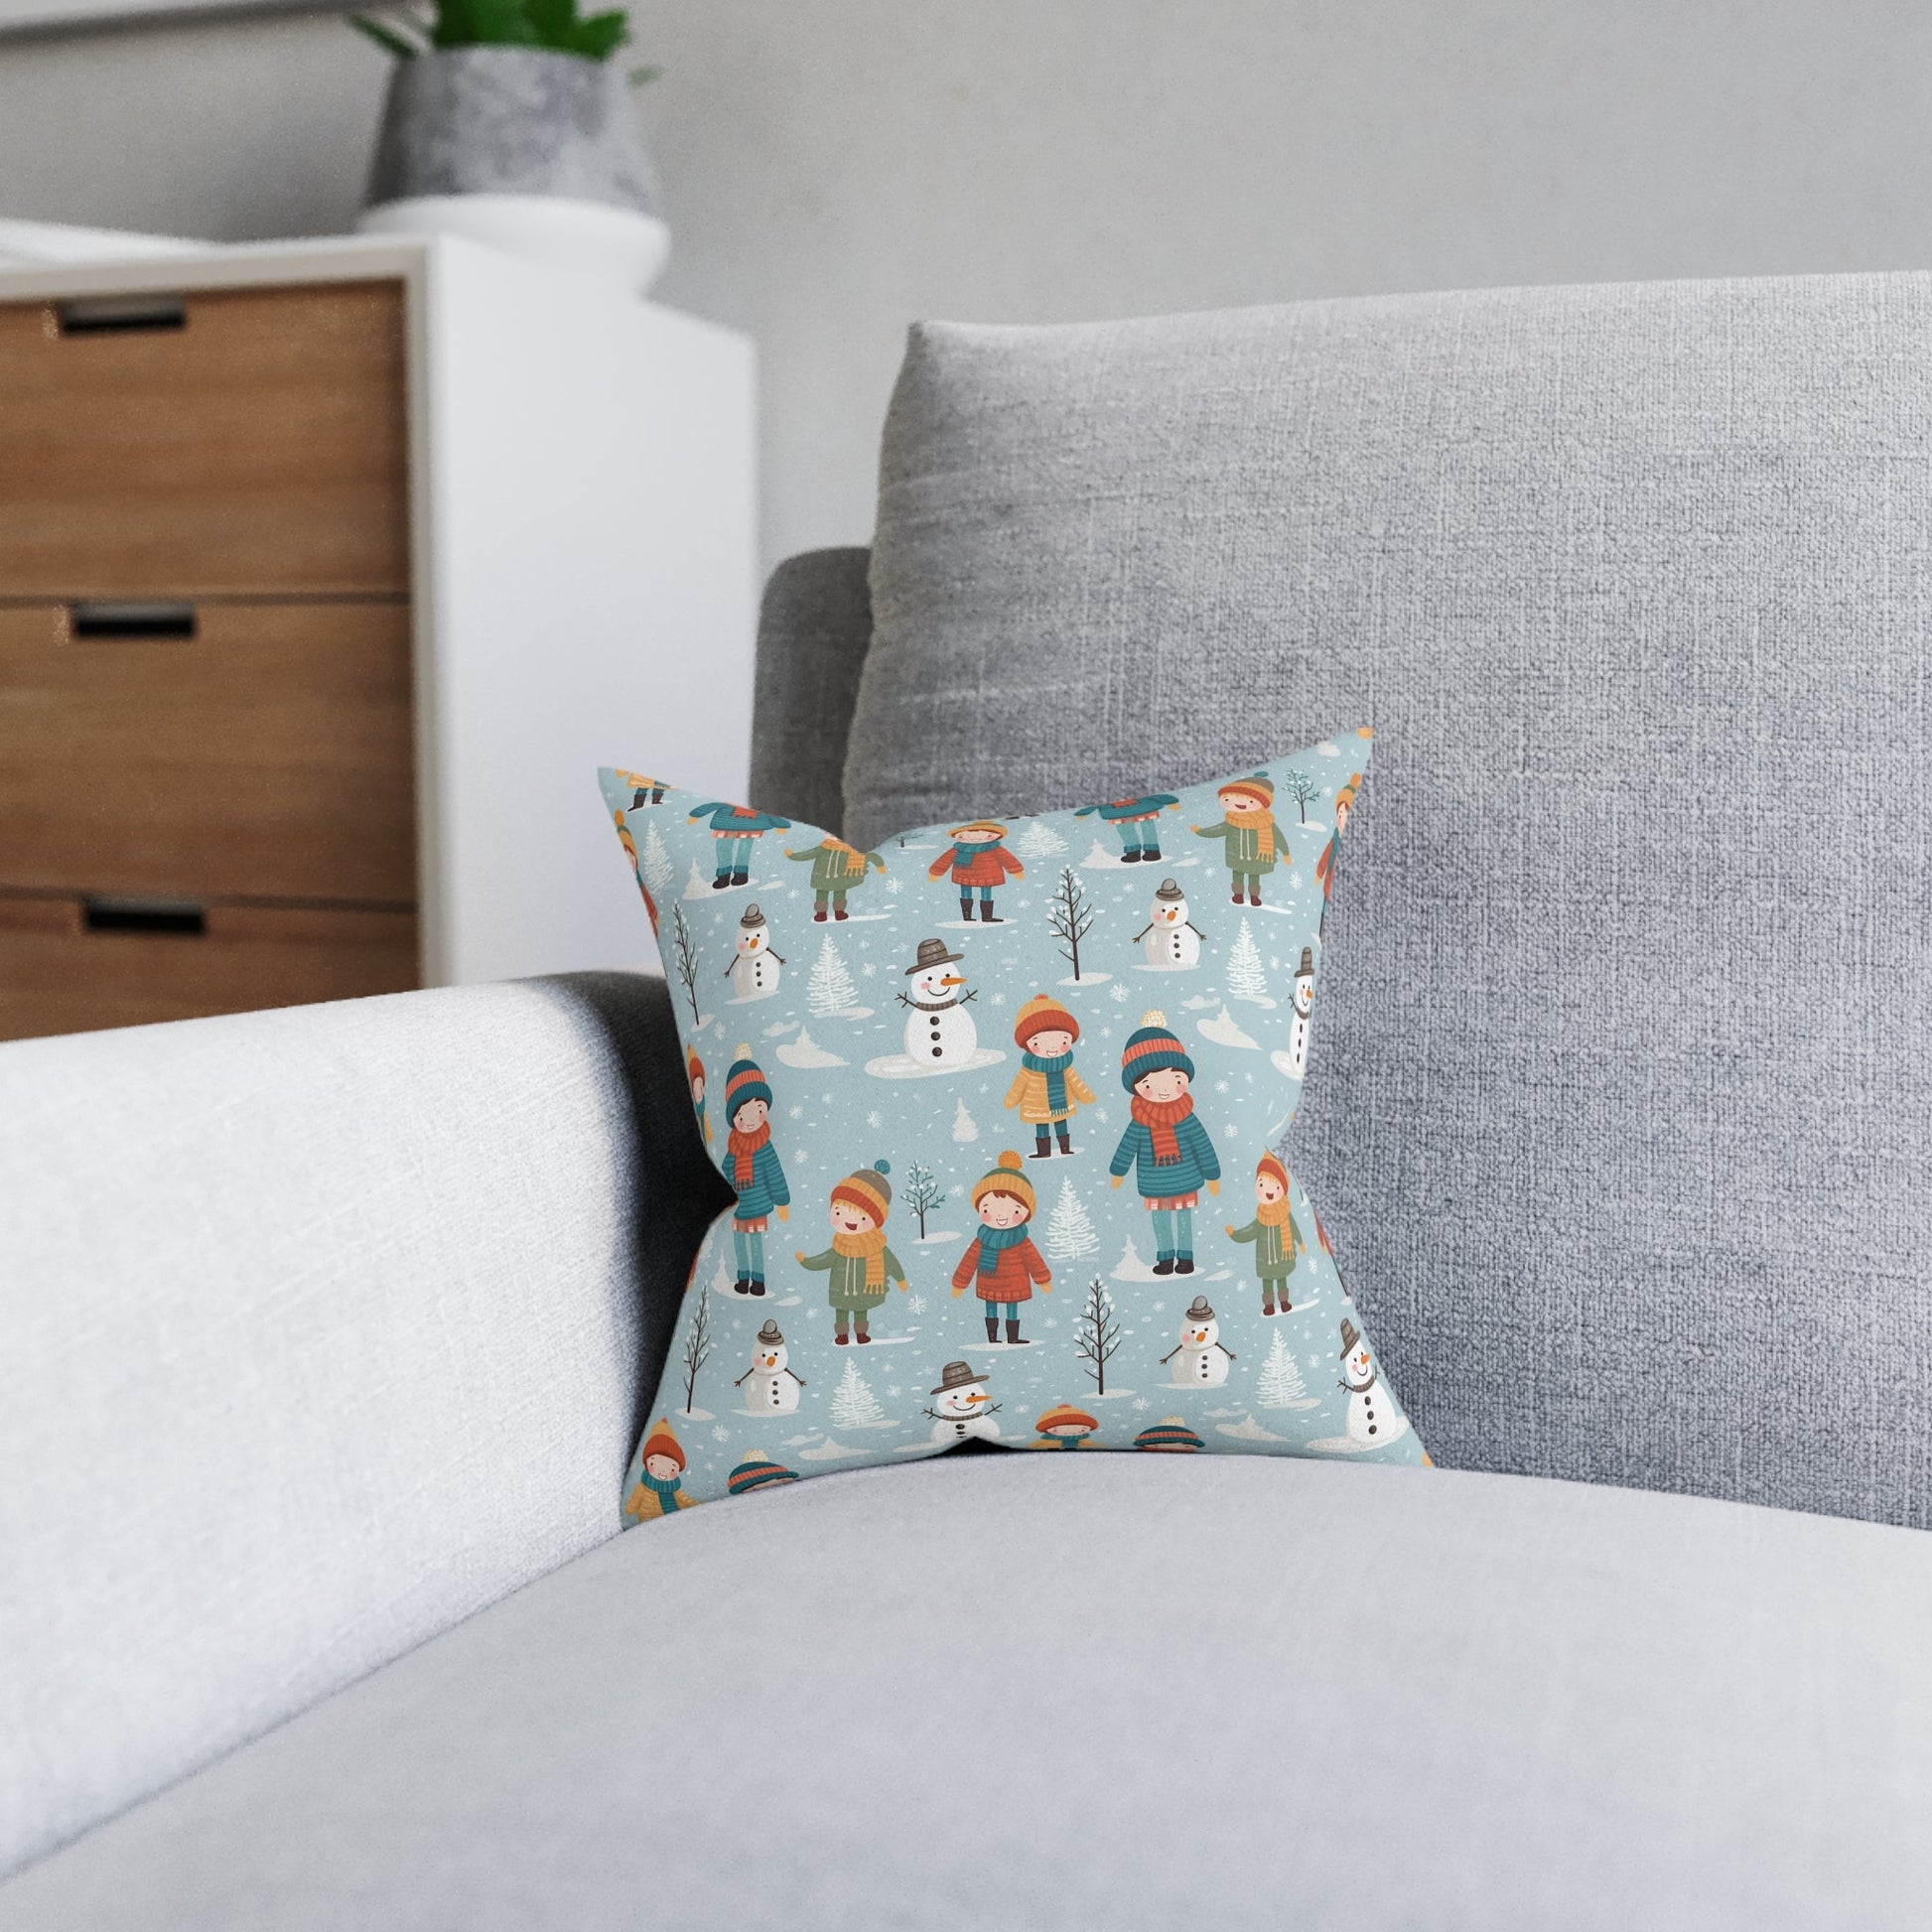 Snowflake Dance - Winter Whimsy - Sofa and Chair Cushion - Pattern Symphony